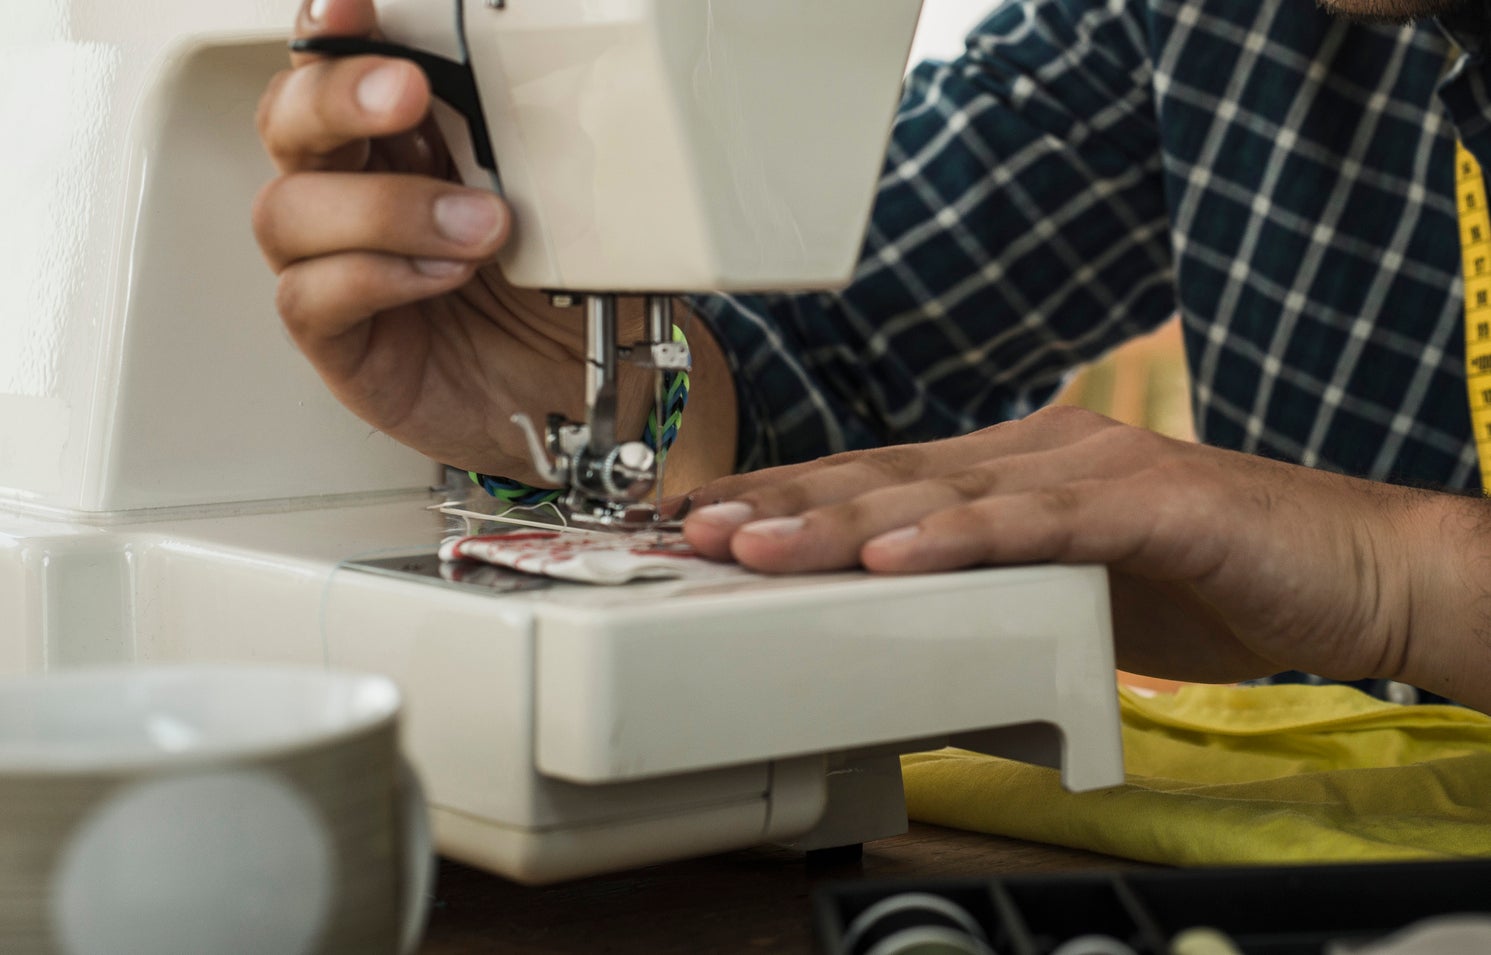 Person using a sewing machine, focused on stitching fabric